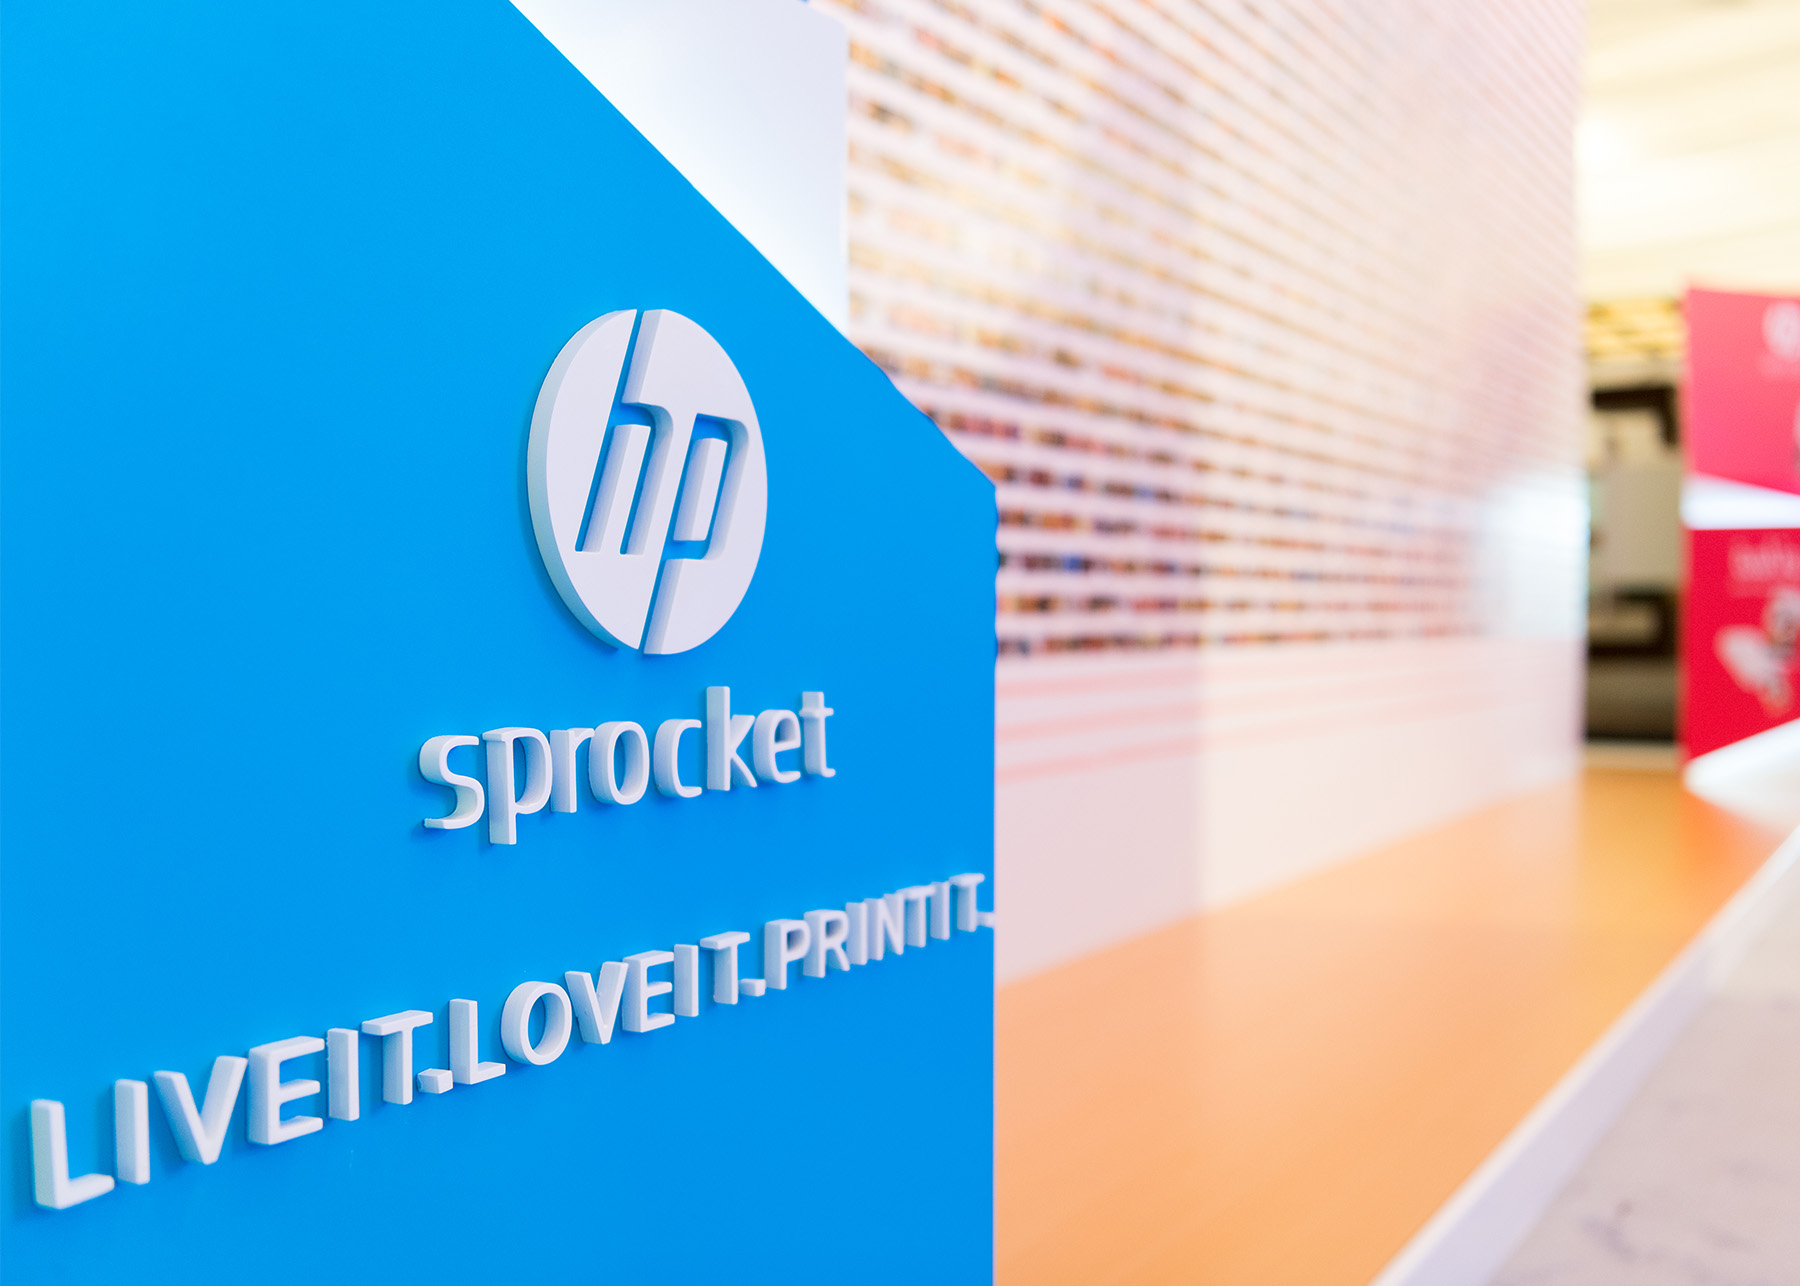  Event design and aesthetics featuring the HP Sprocket printer